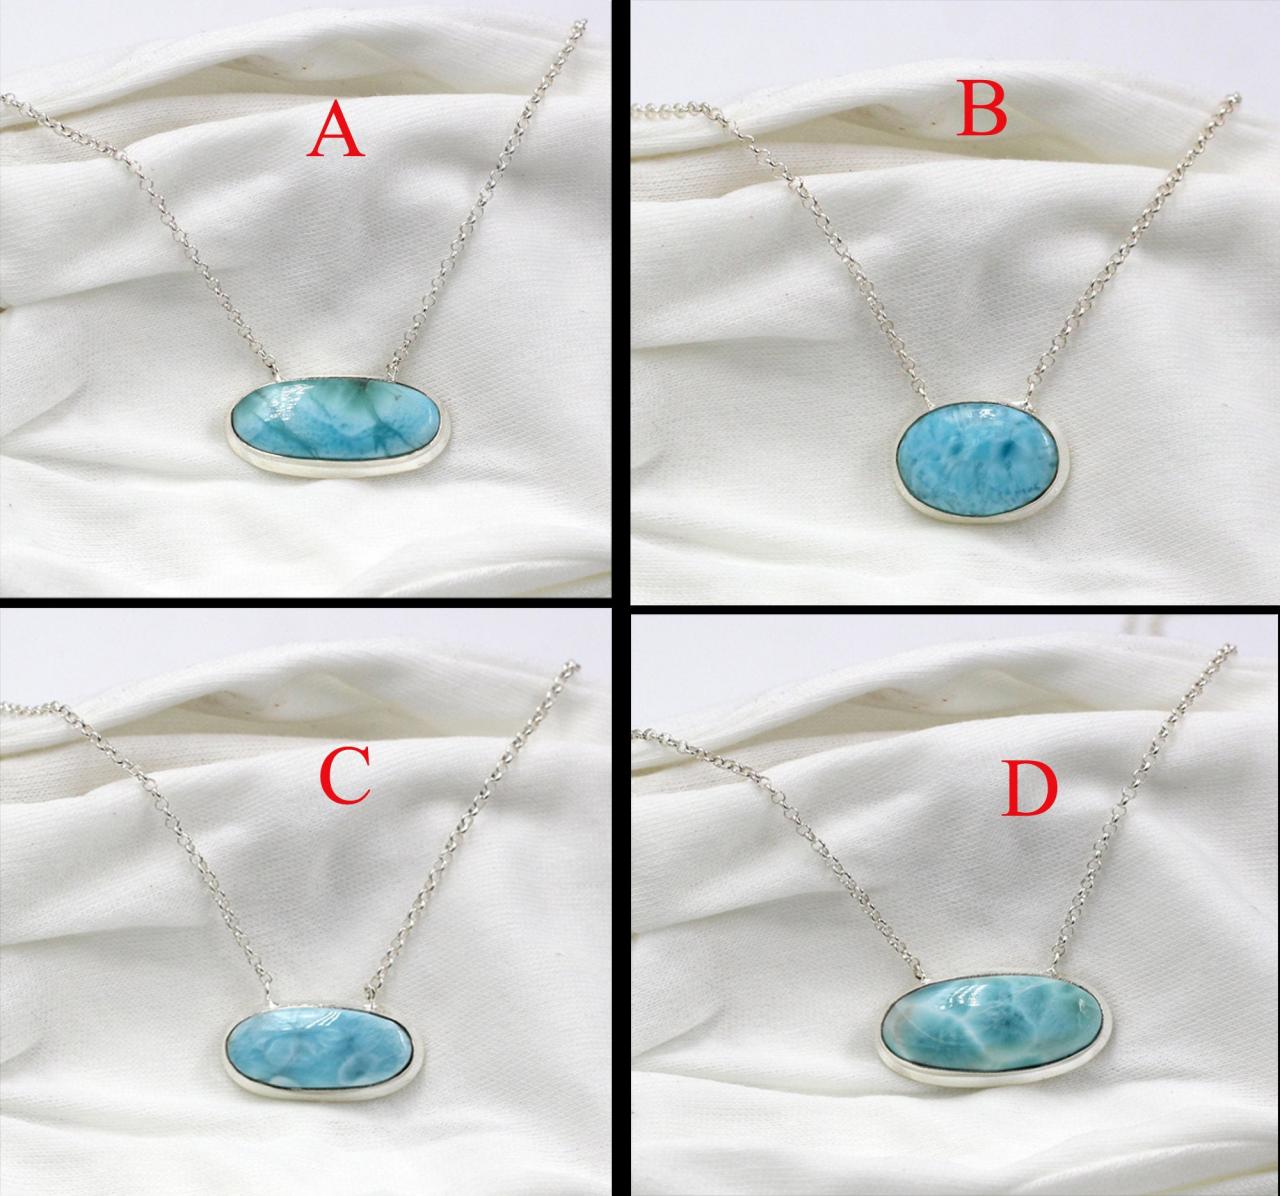 Elegant Dominican Larimar Necklace,christmas Gift Chain Pendant,solid 925 Sterling Silver Jewelry,natural Gemstone,anniversary Gift Necklace